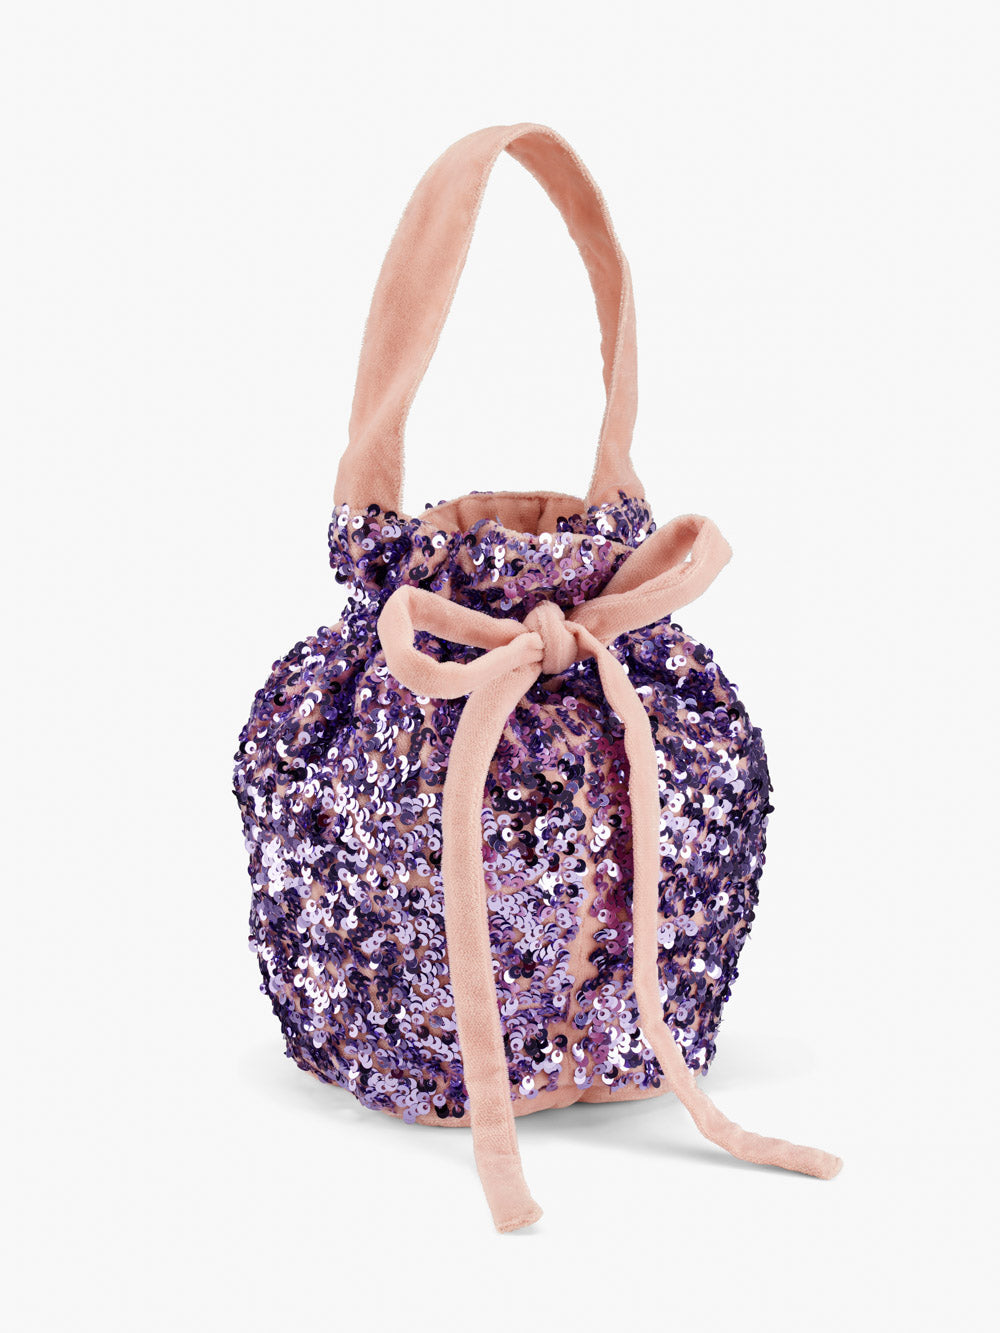 Stych Girl's Lilac Velvet & Lilac Sequin Bucket Bag With Handle,  Drawstring & Tie Closure